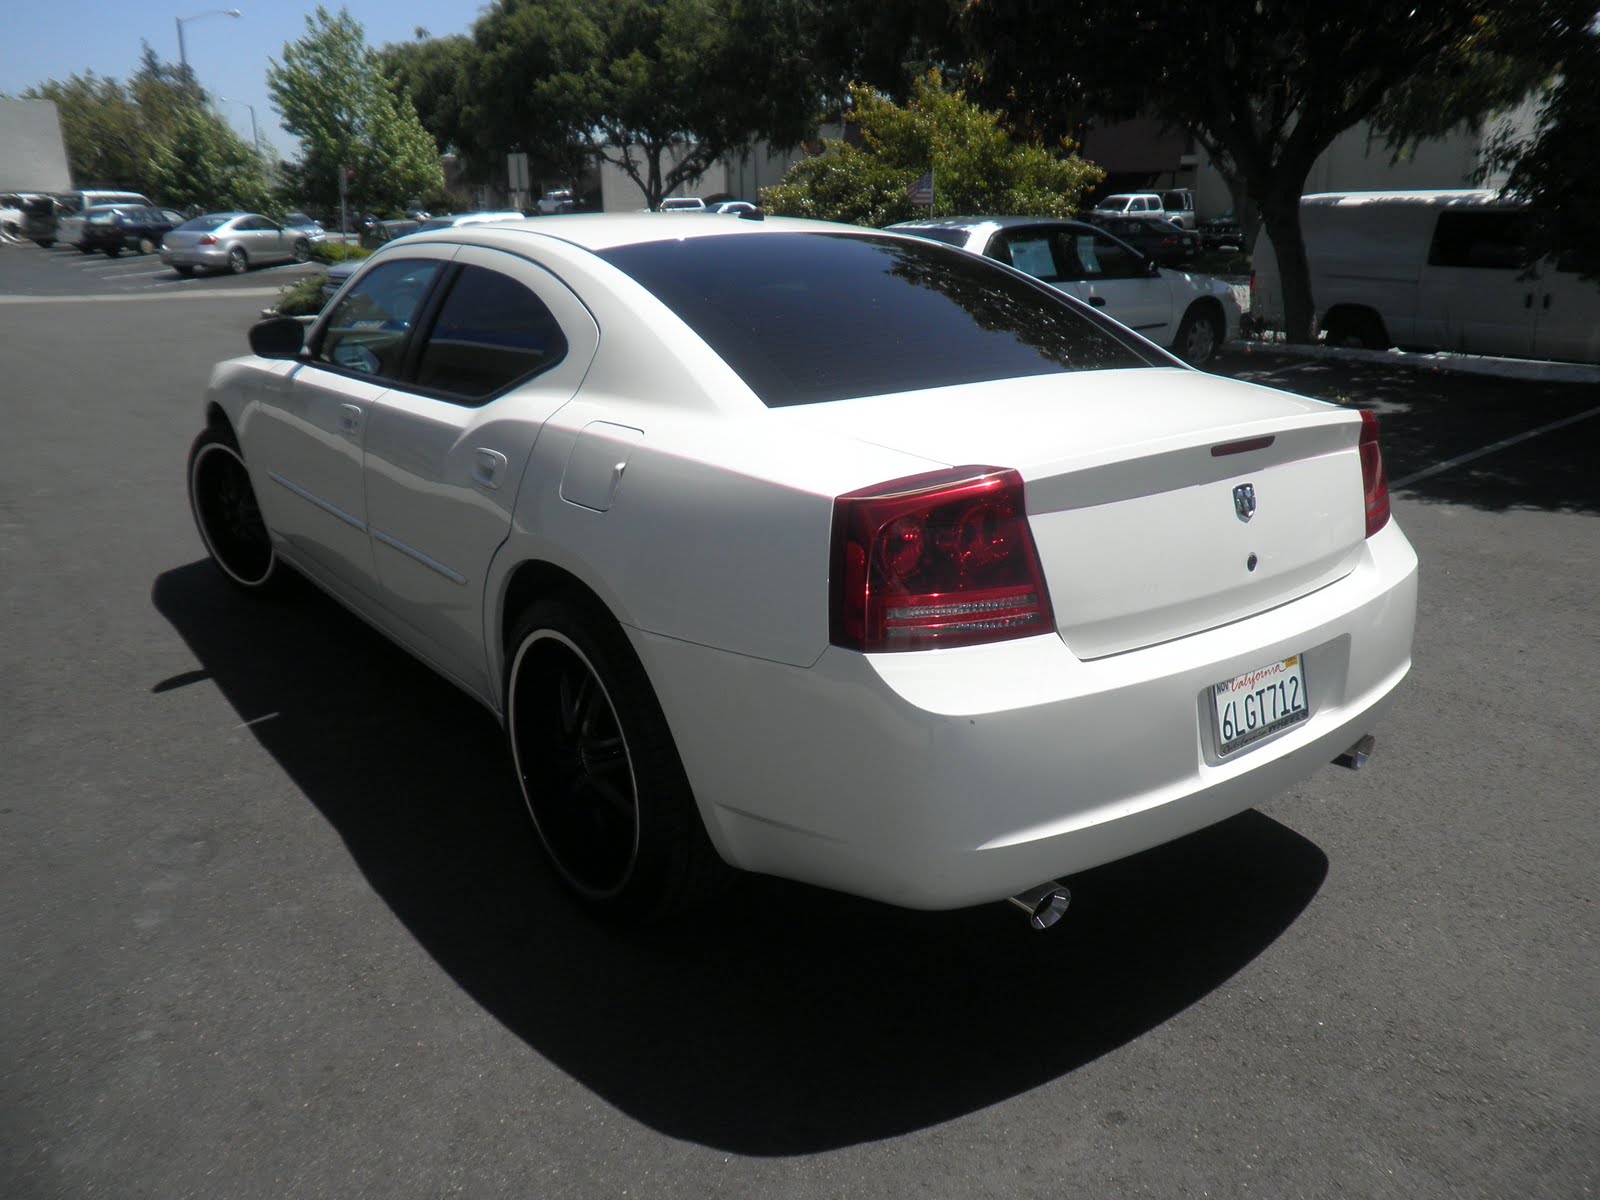 custom modifications: Car of the Day - 2008 Dodge Charger with Auto